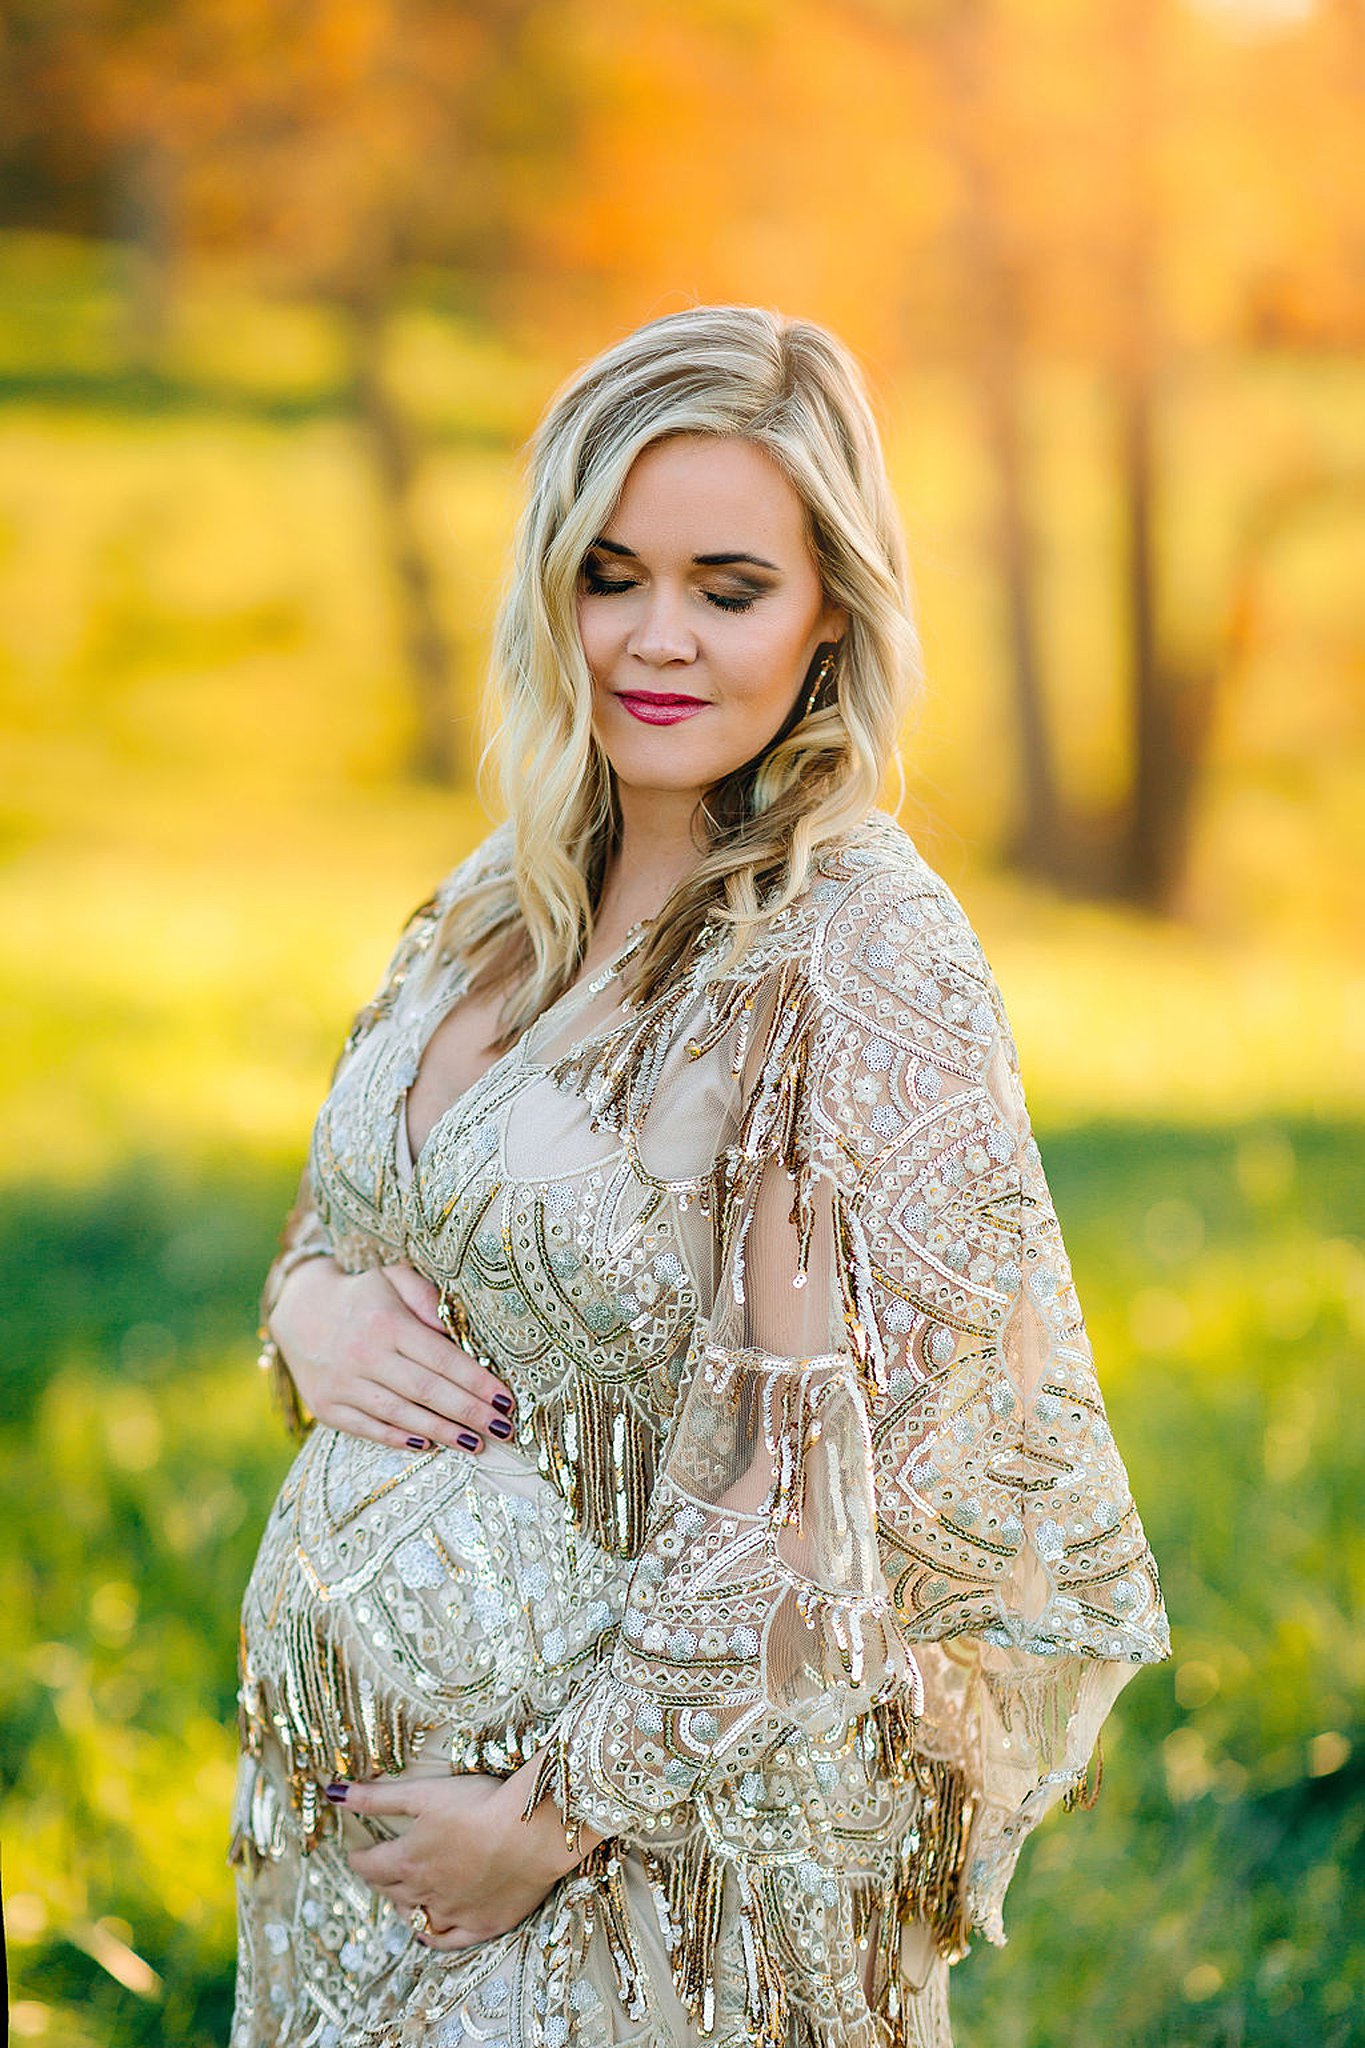 Mom to be wears a patterned maternity gown in a grassy field